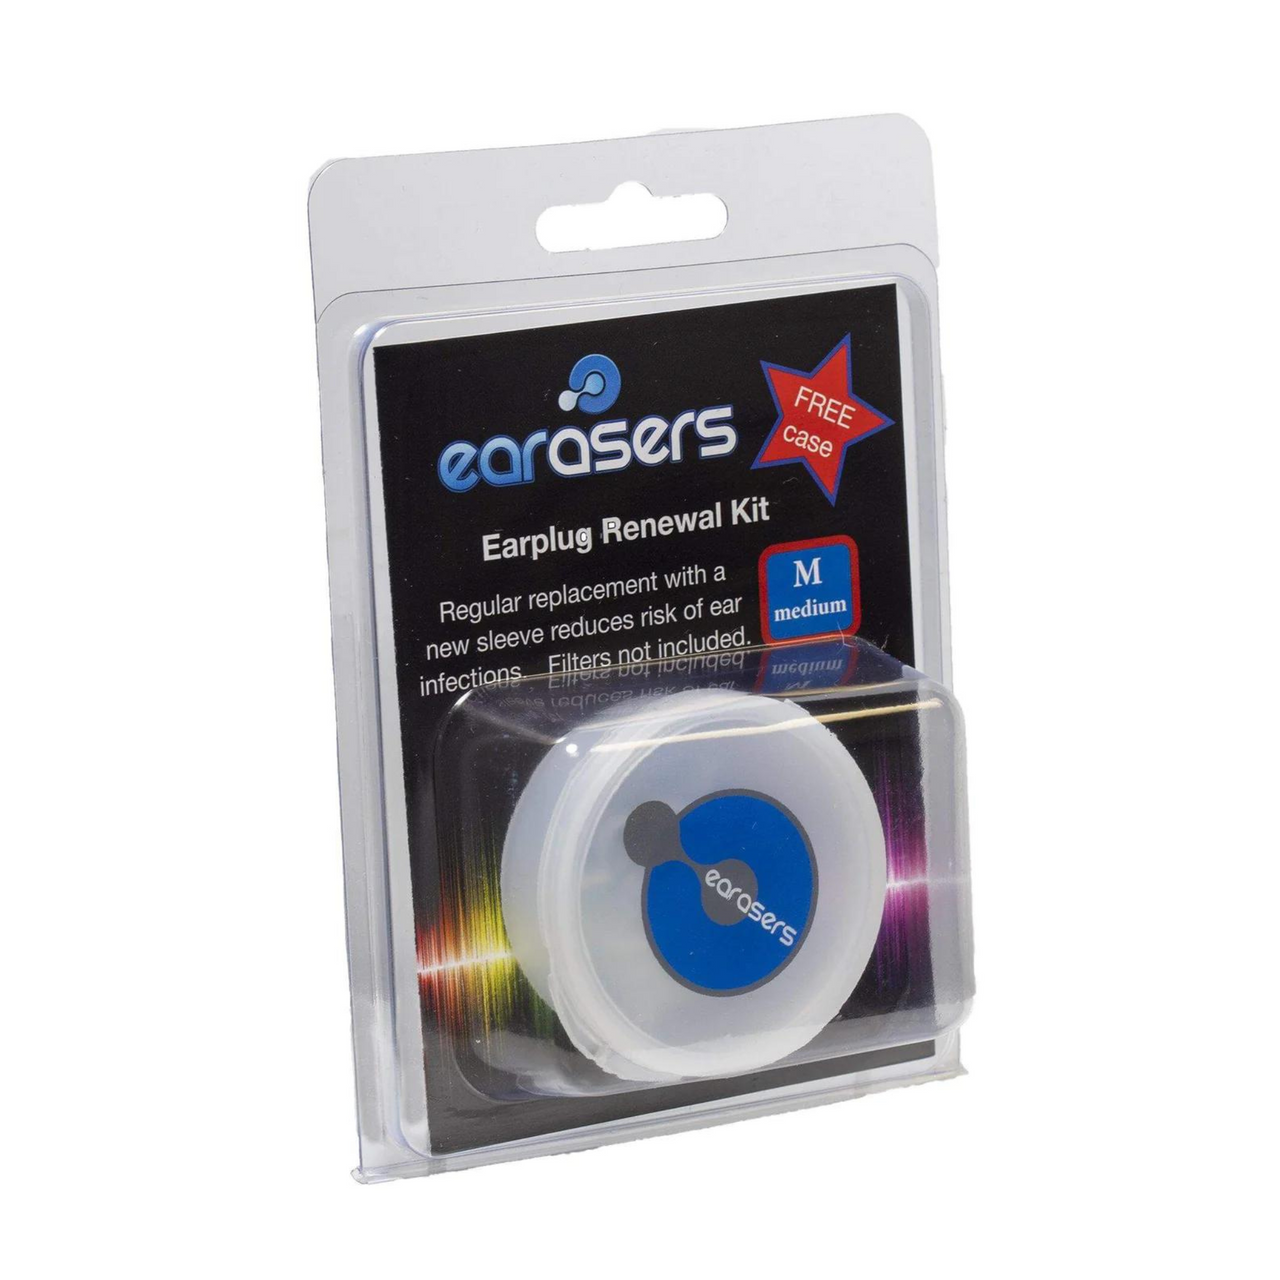 EARASERS RK-1S RENEWAL KIT SMALL2